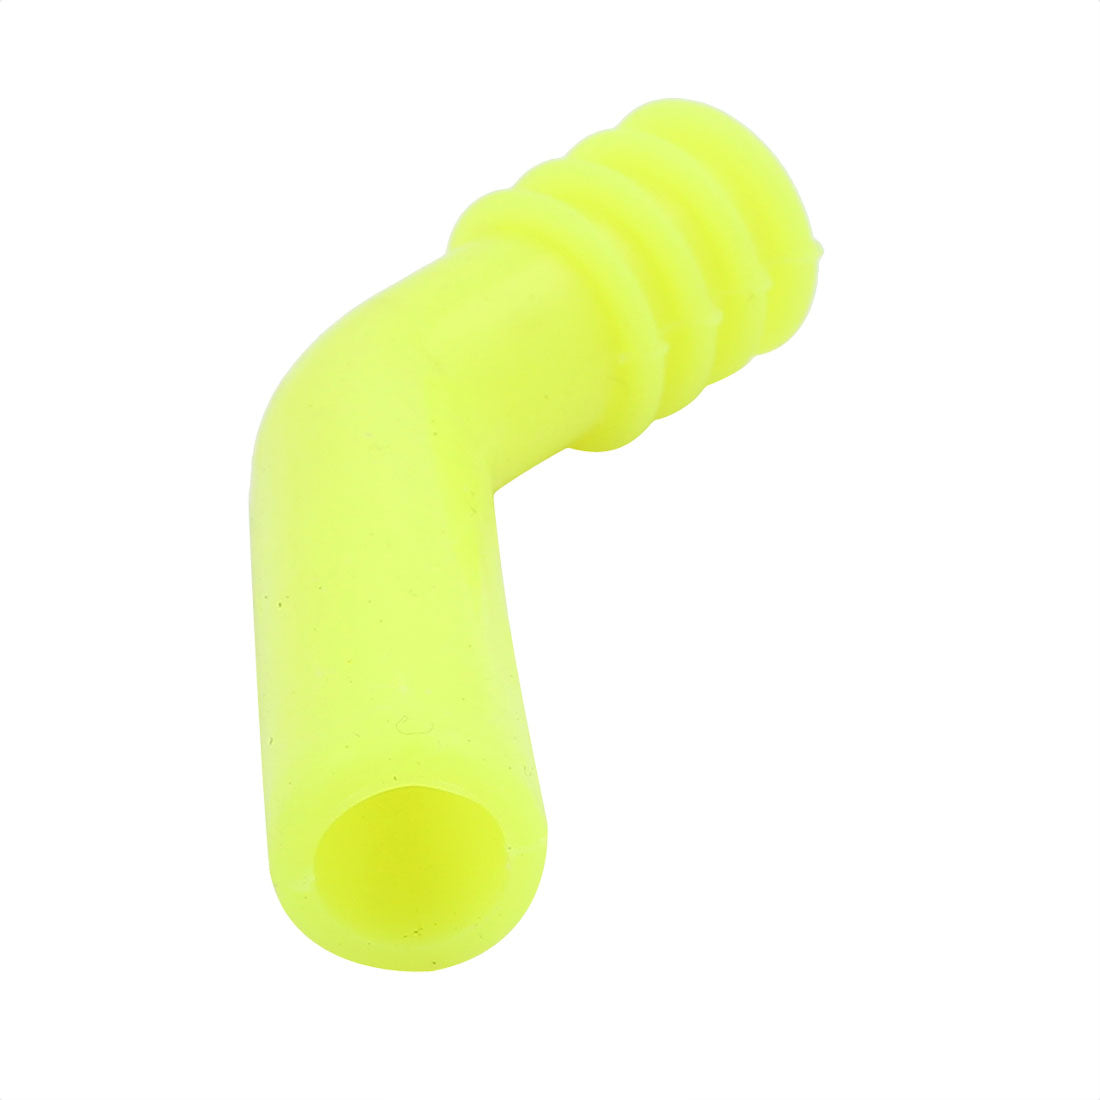 uxcell Uxcell 10mm Inner Dia Silicone Exhaust Deflector Exhaust Tube Yellow for RC Models 2pcs